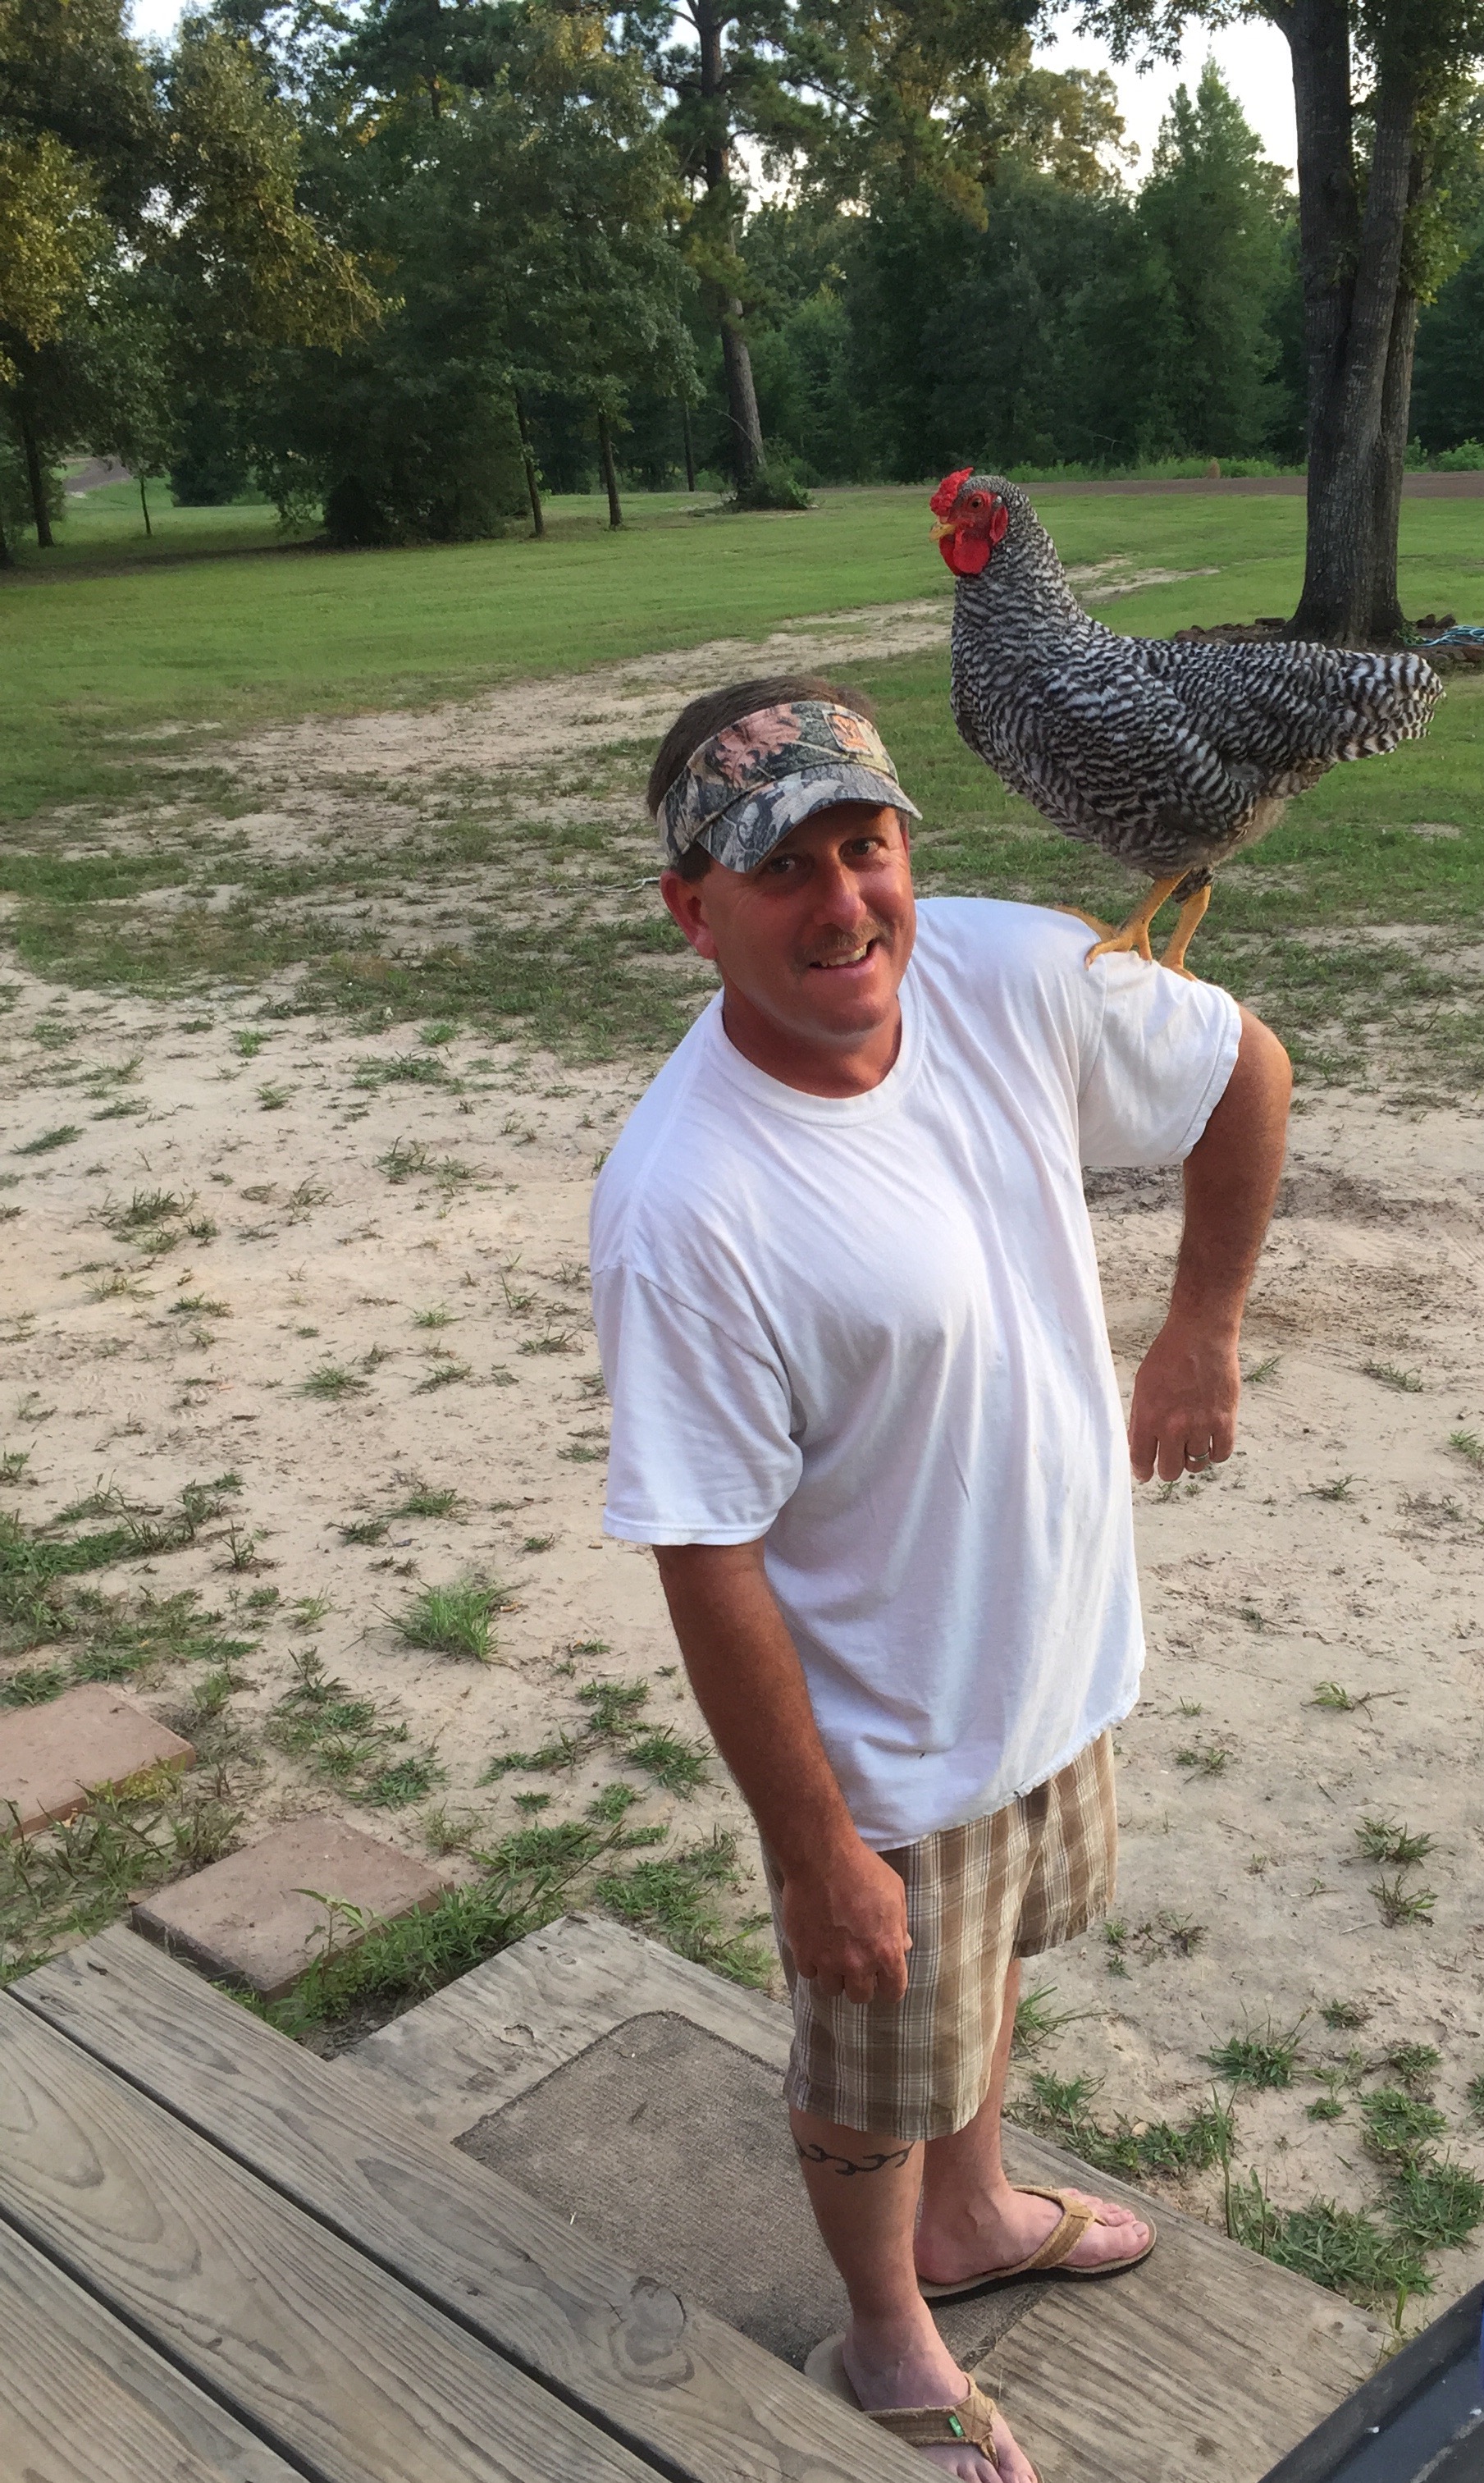 Me, and our rooster "Richard"